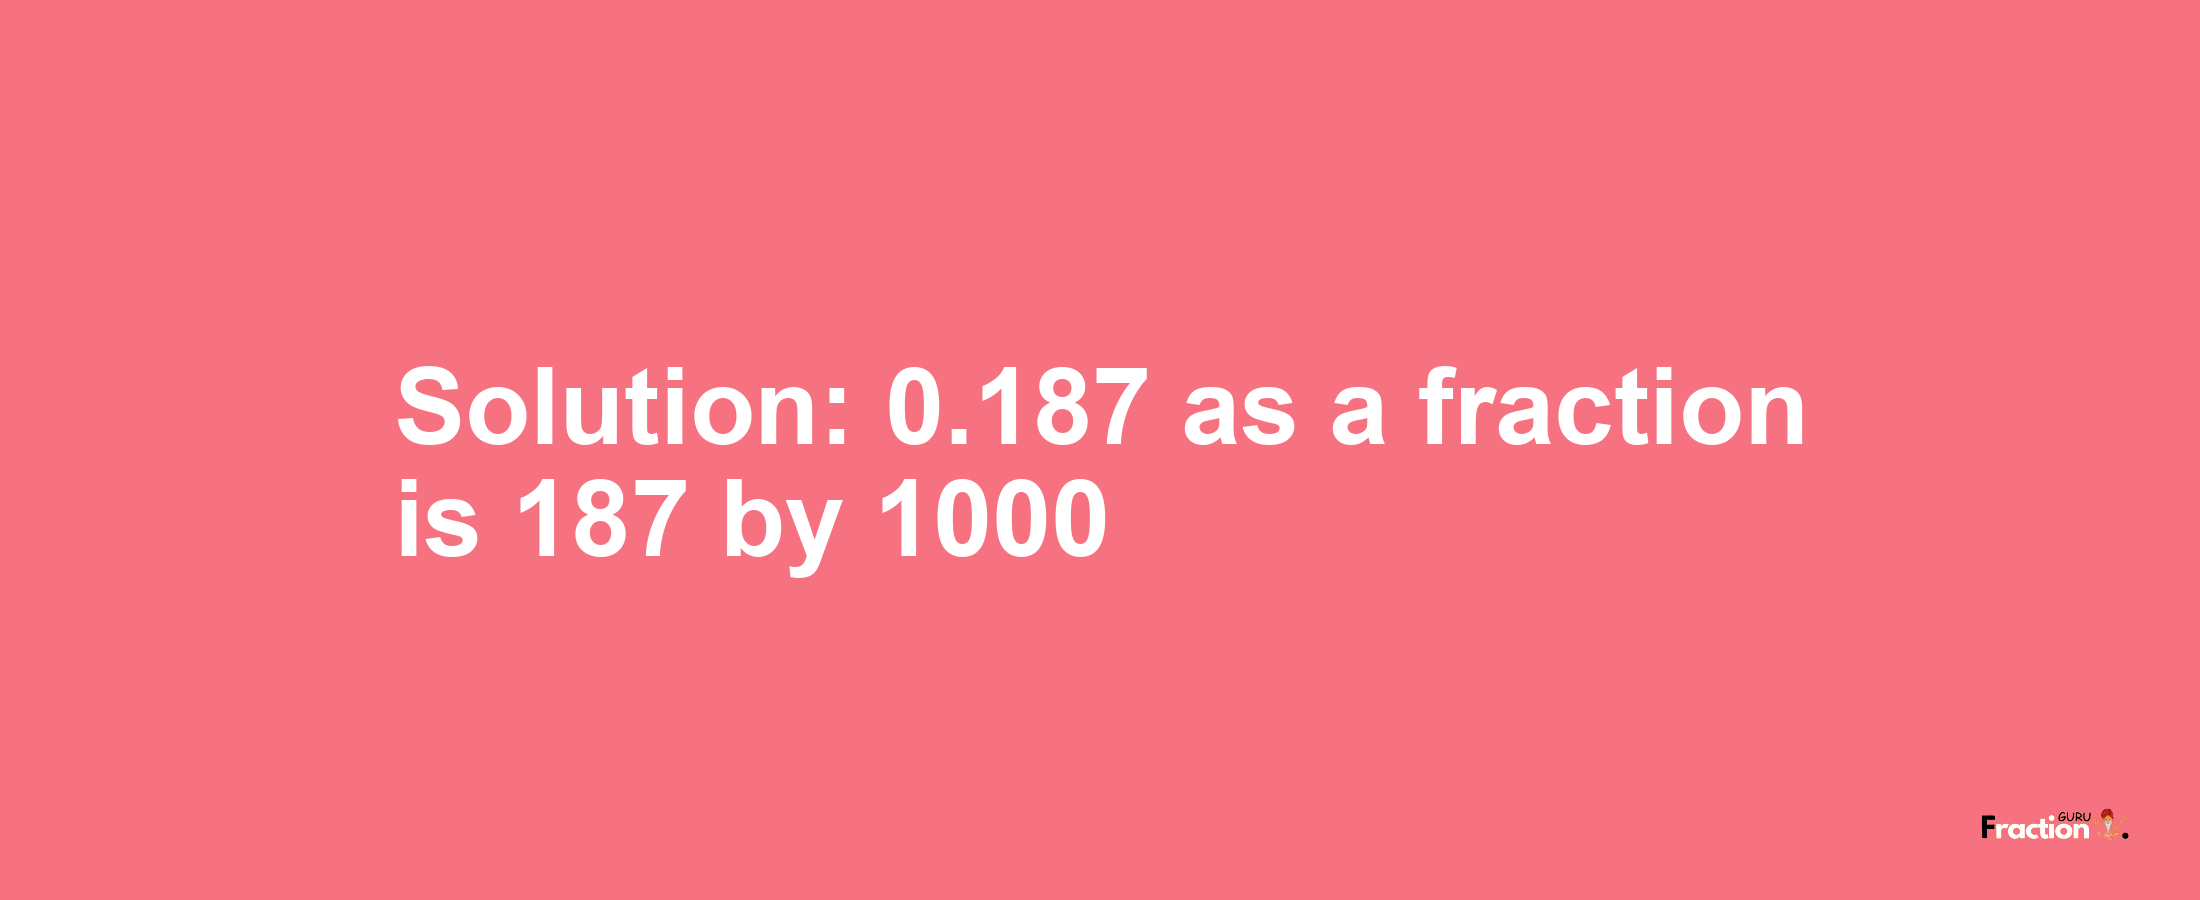 Solution:0.187 as a fraction is 187/1000